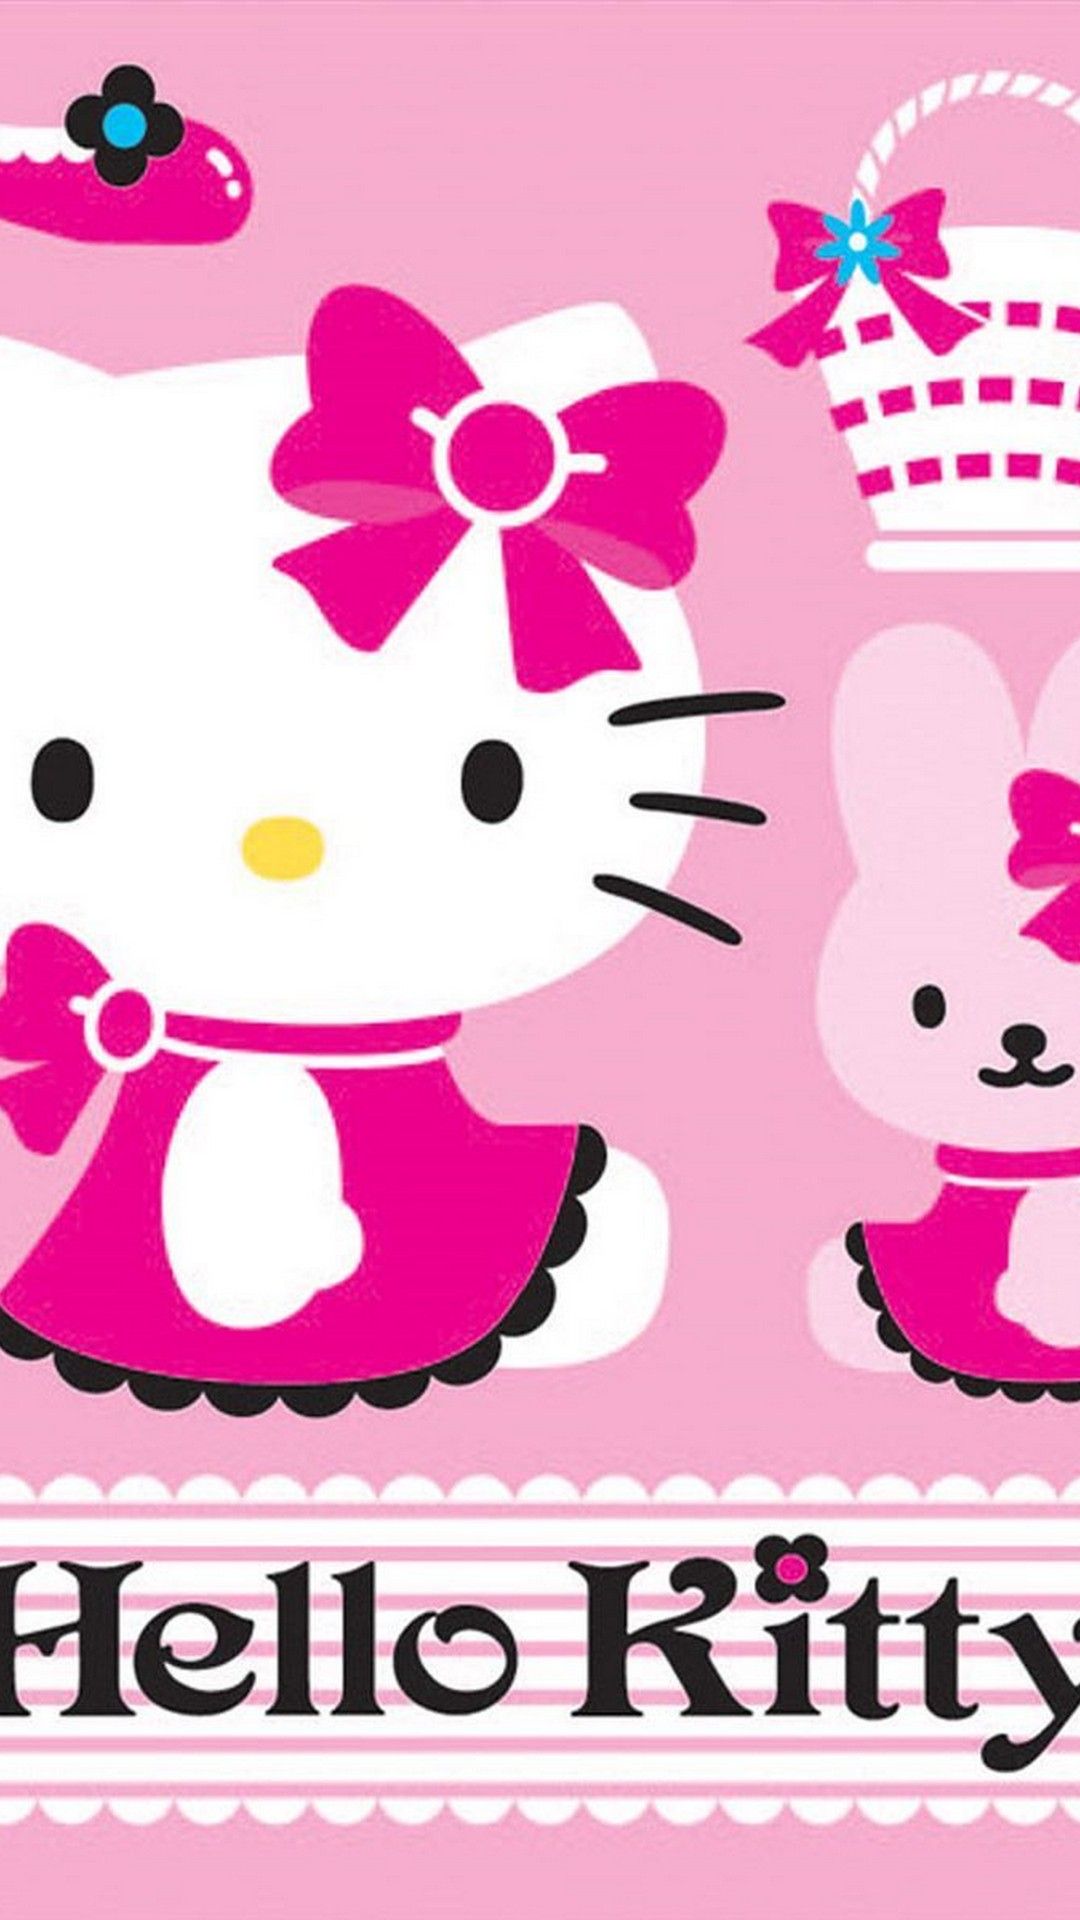 Wallpaper Hello Kitty Android Android Wallpaper